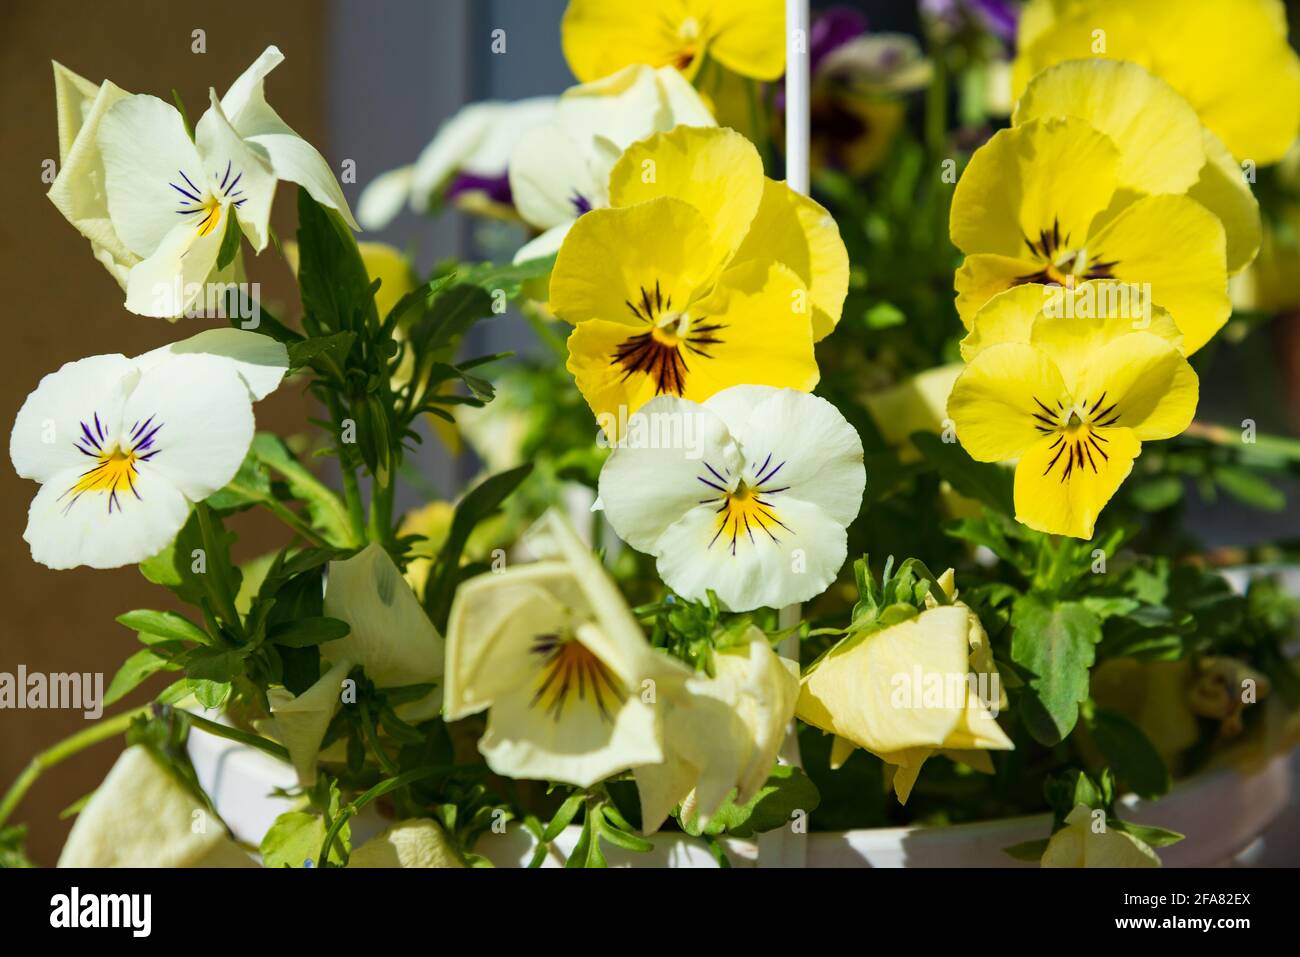 Viola plant in the flower pot, home garden, close up Stock Photo